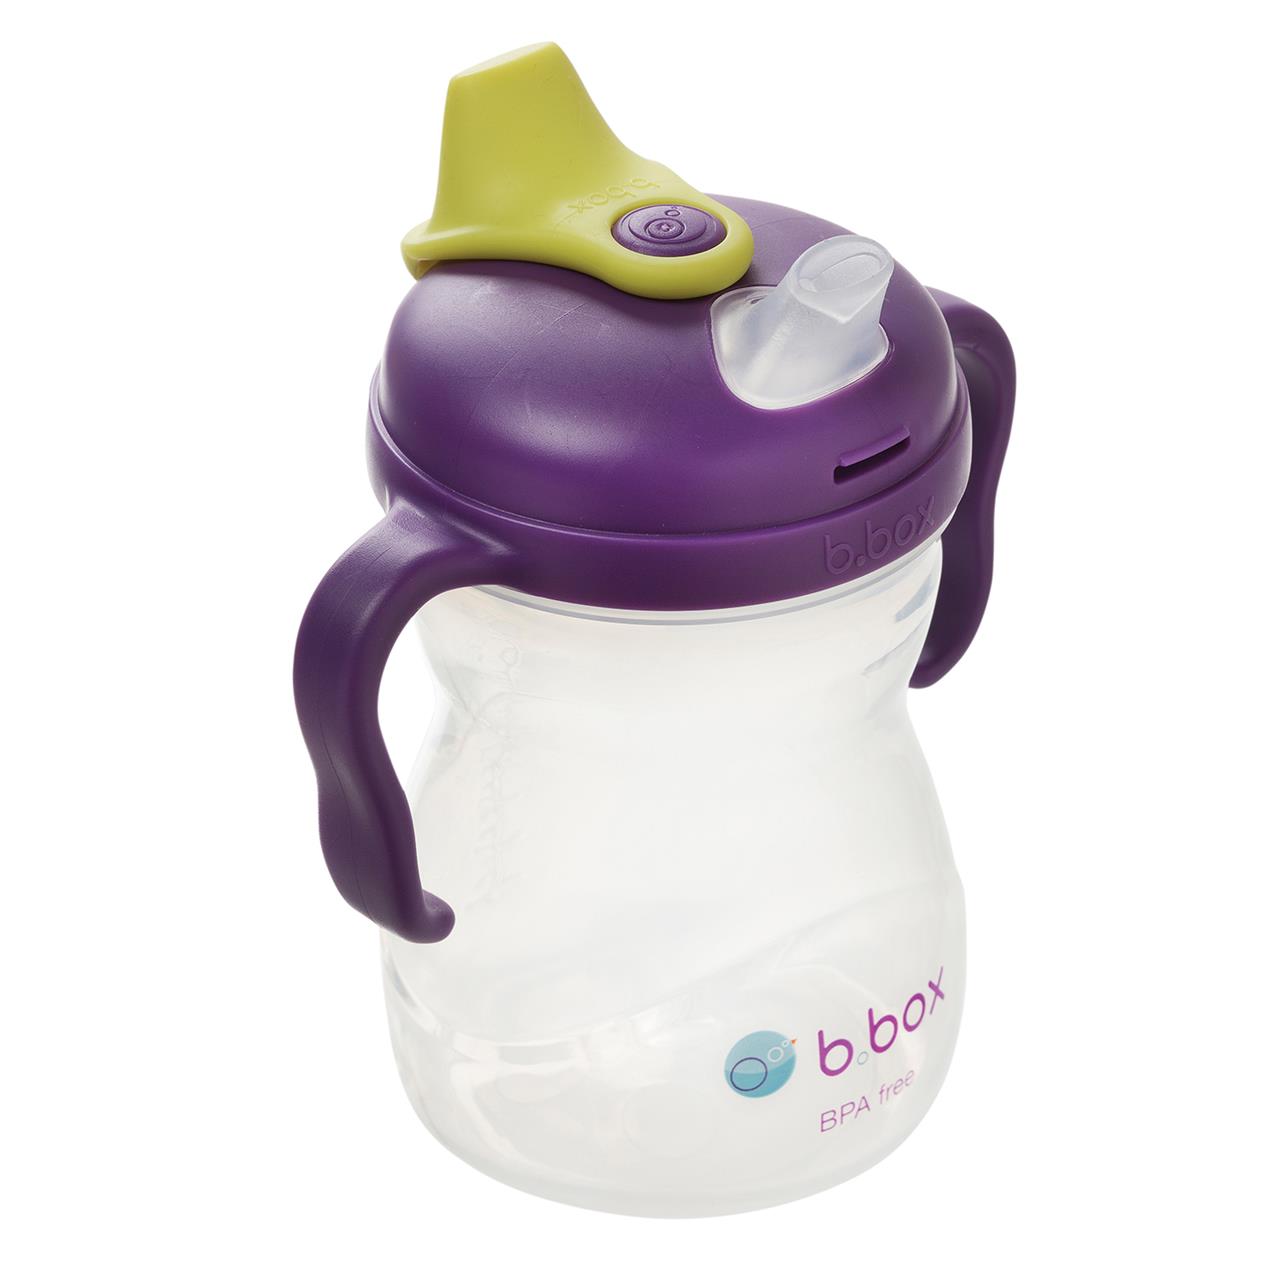 b.box Spout Cup in Grape available at Bear & Moo